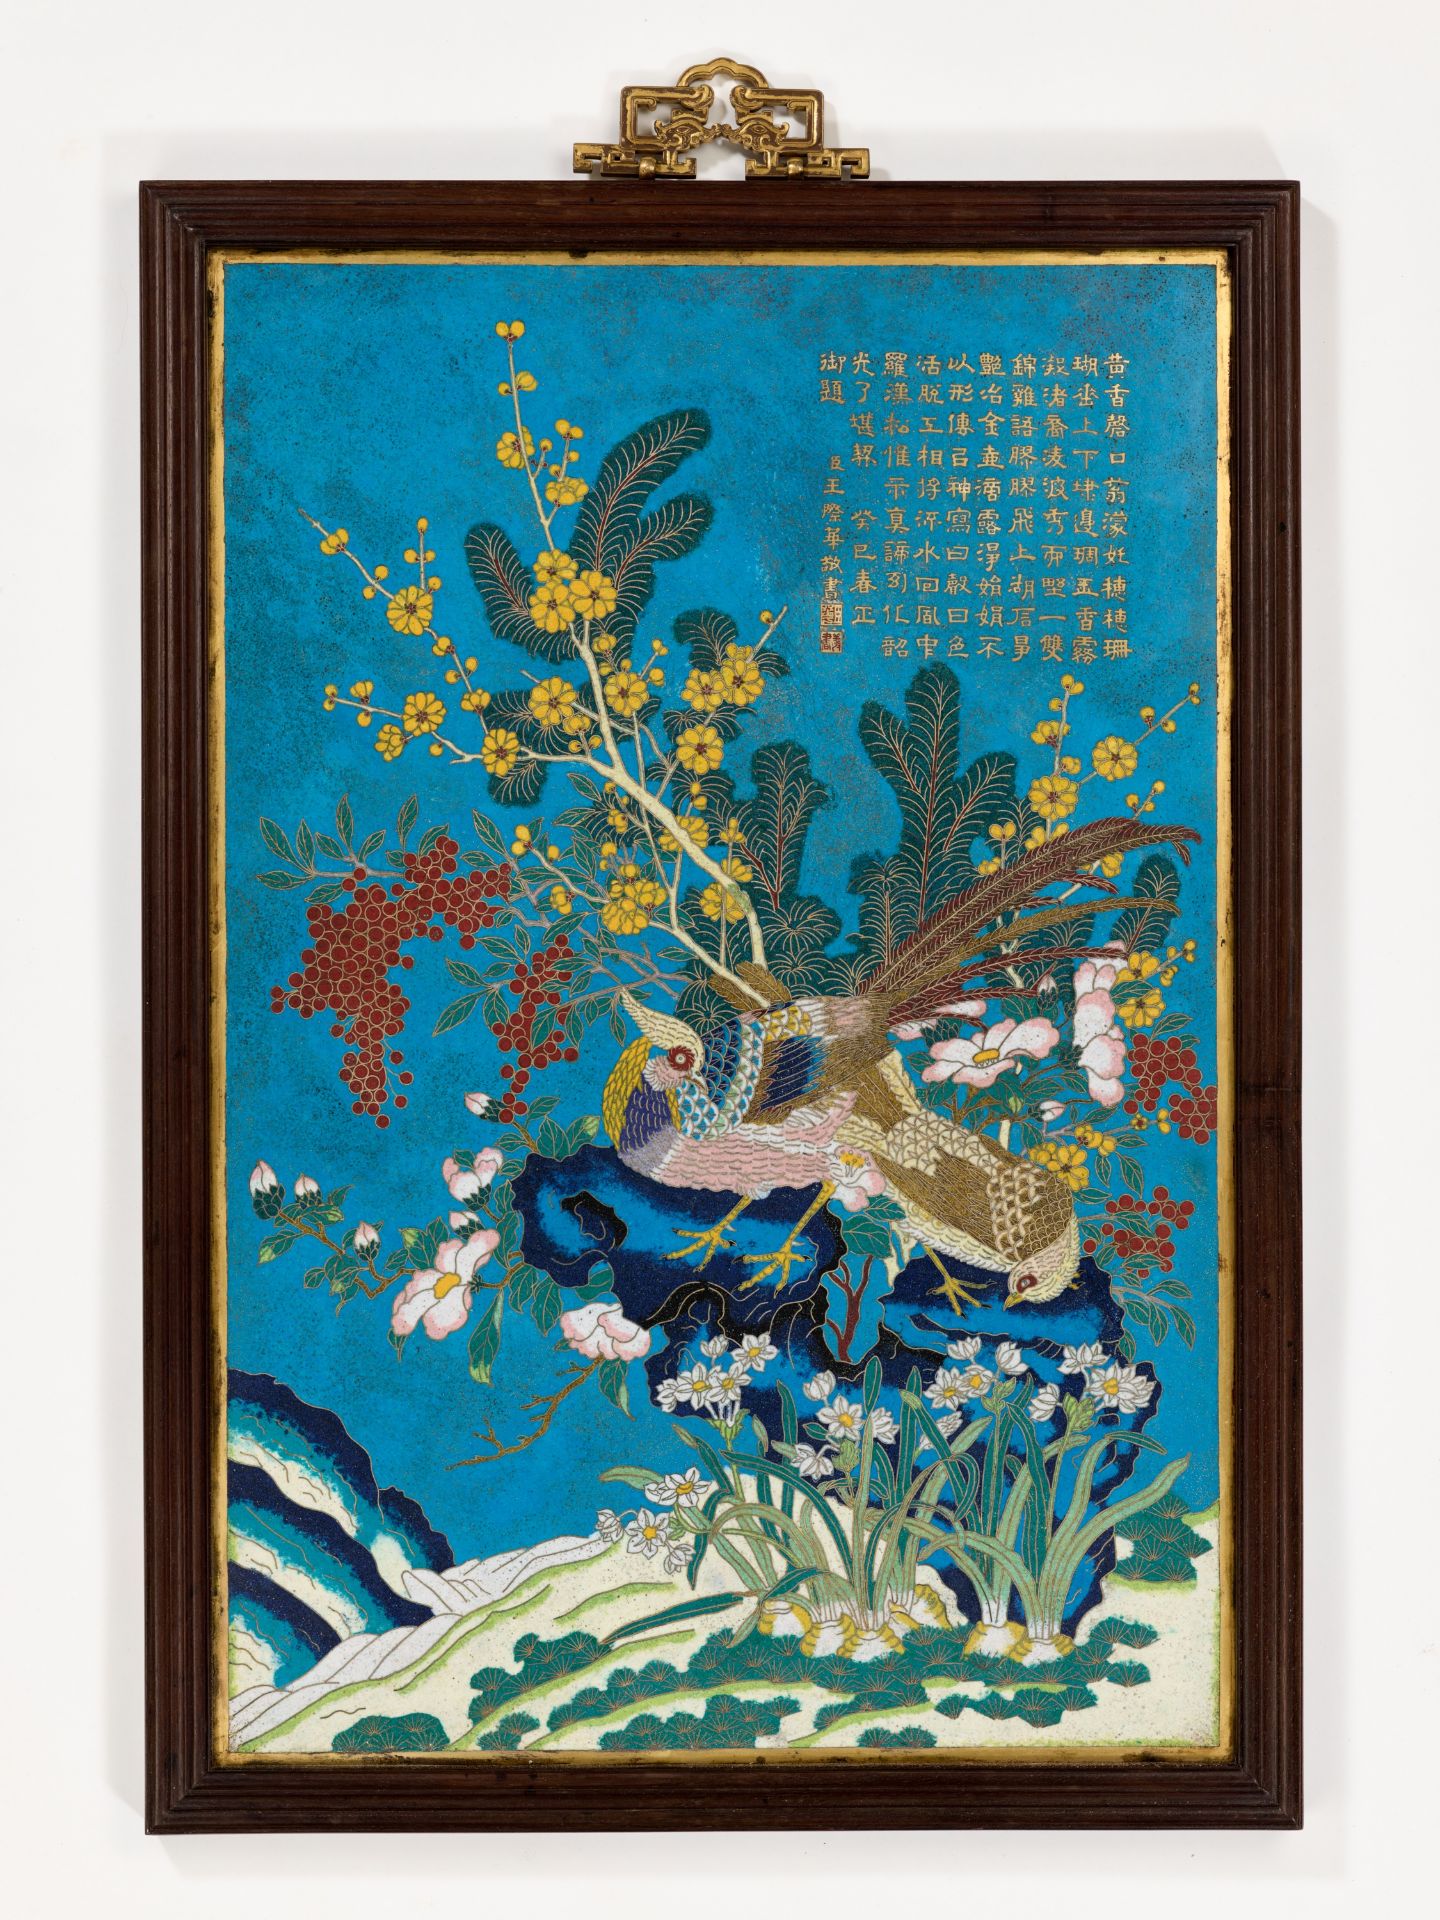 A CLOISONNE PANEL, INSCRIBED WITH A POEM BY THE QIANLONG EMPEROR